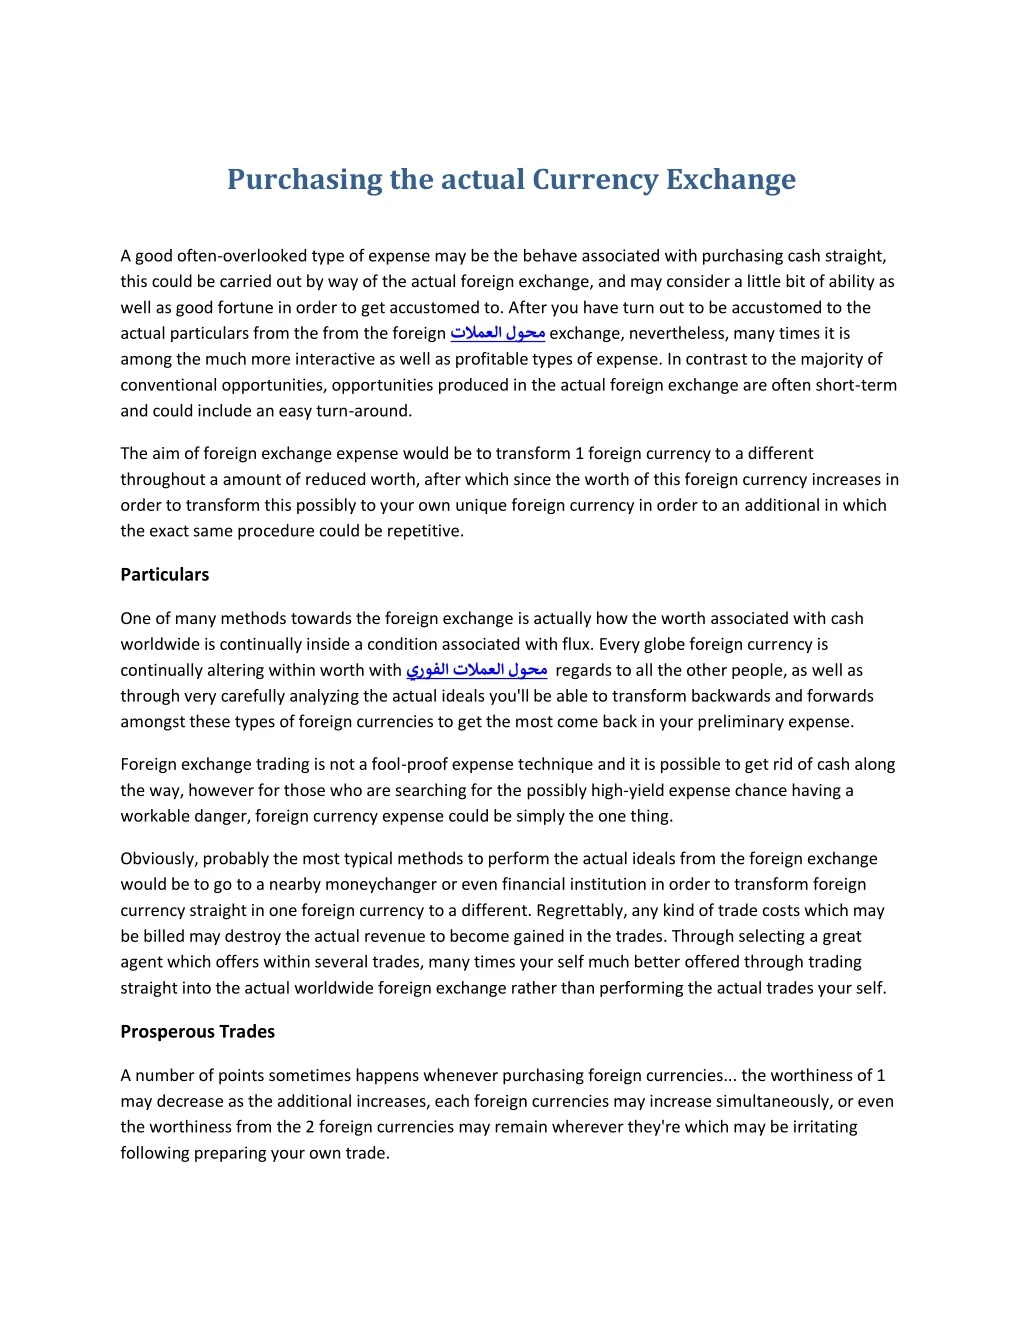 purchasing the actual currency exchange